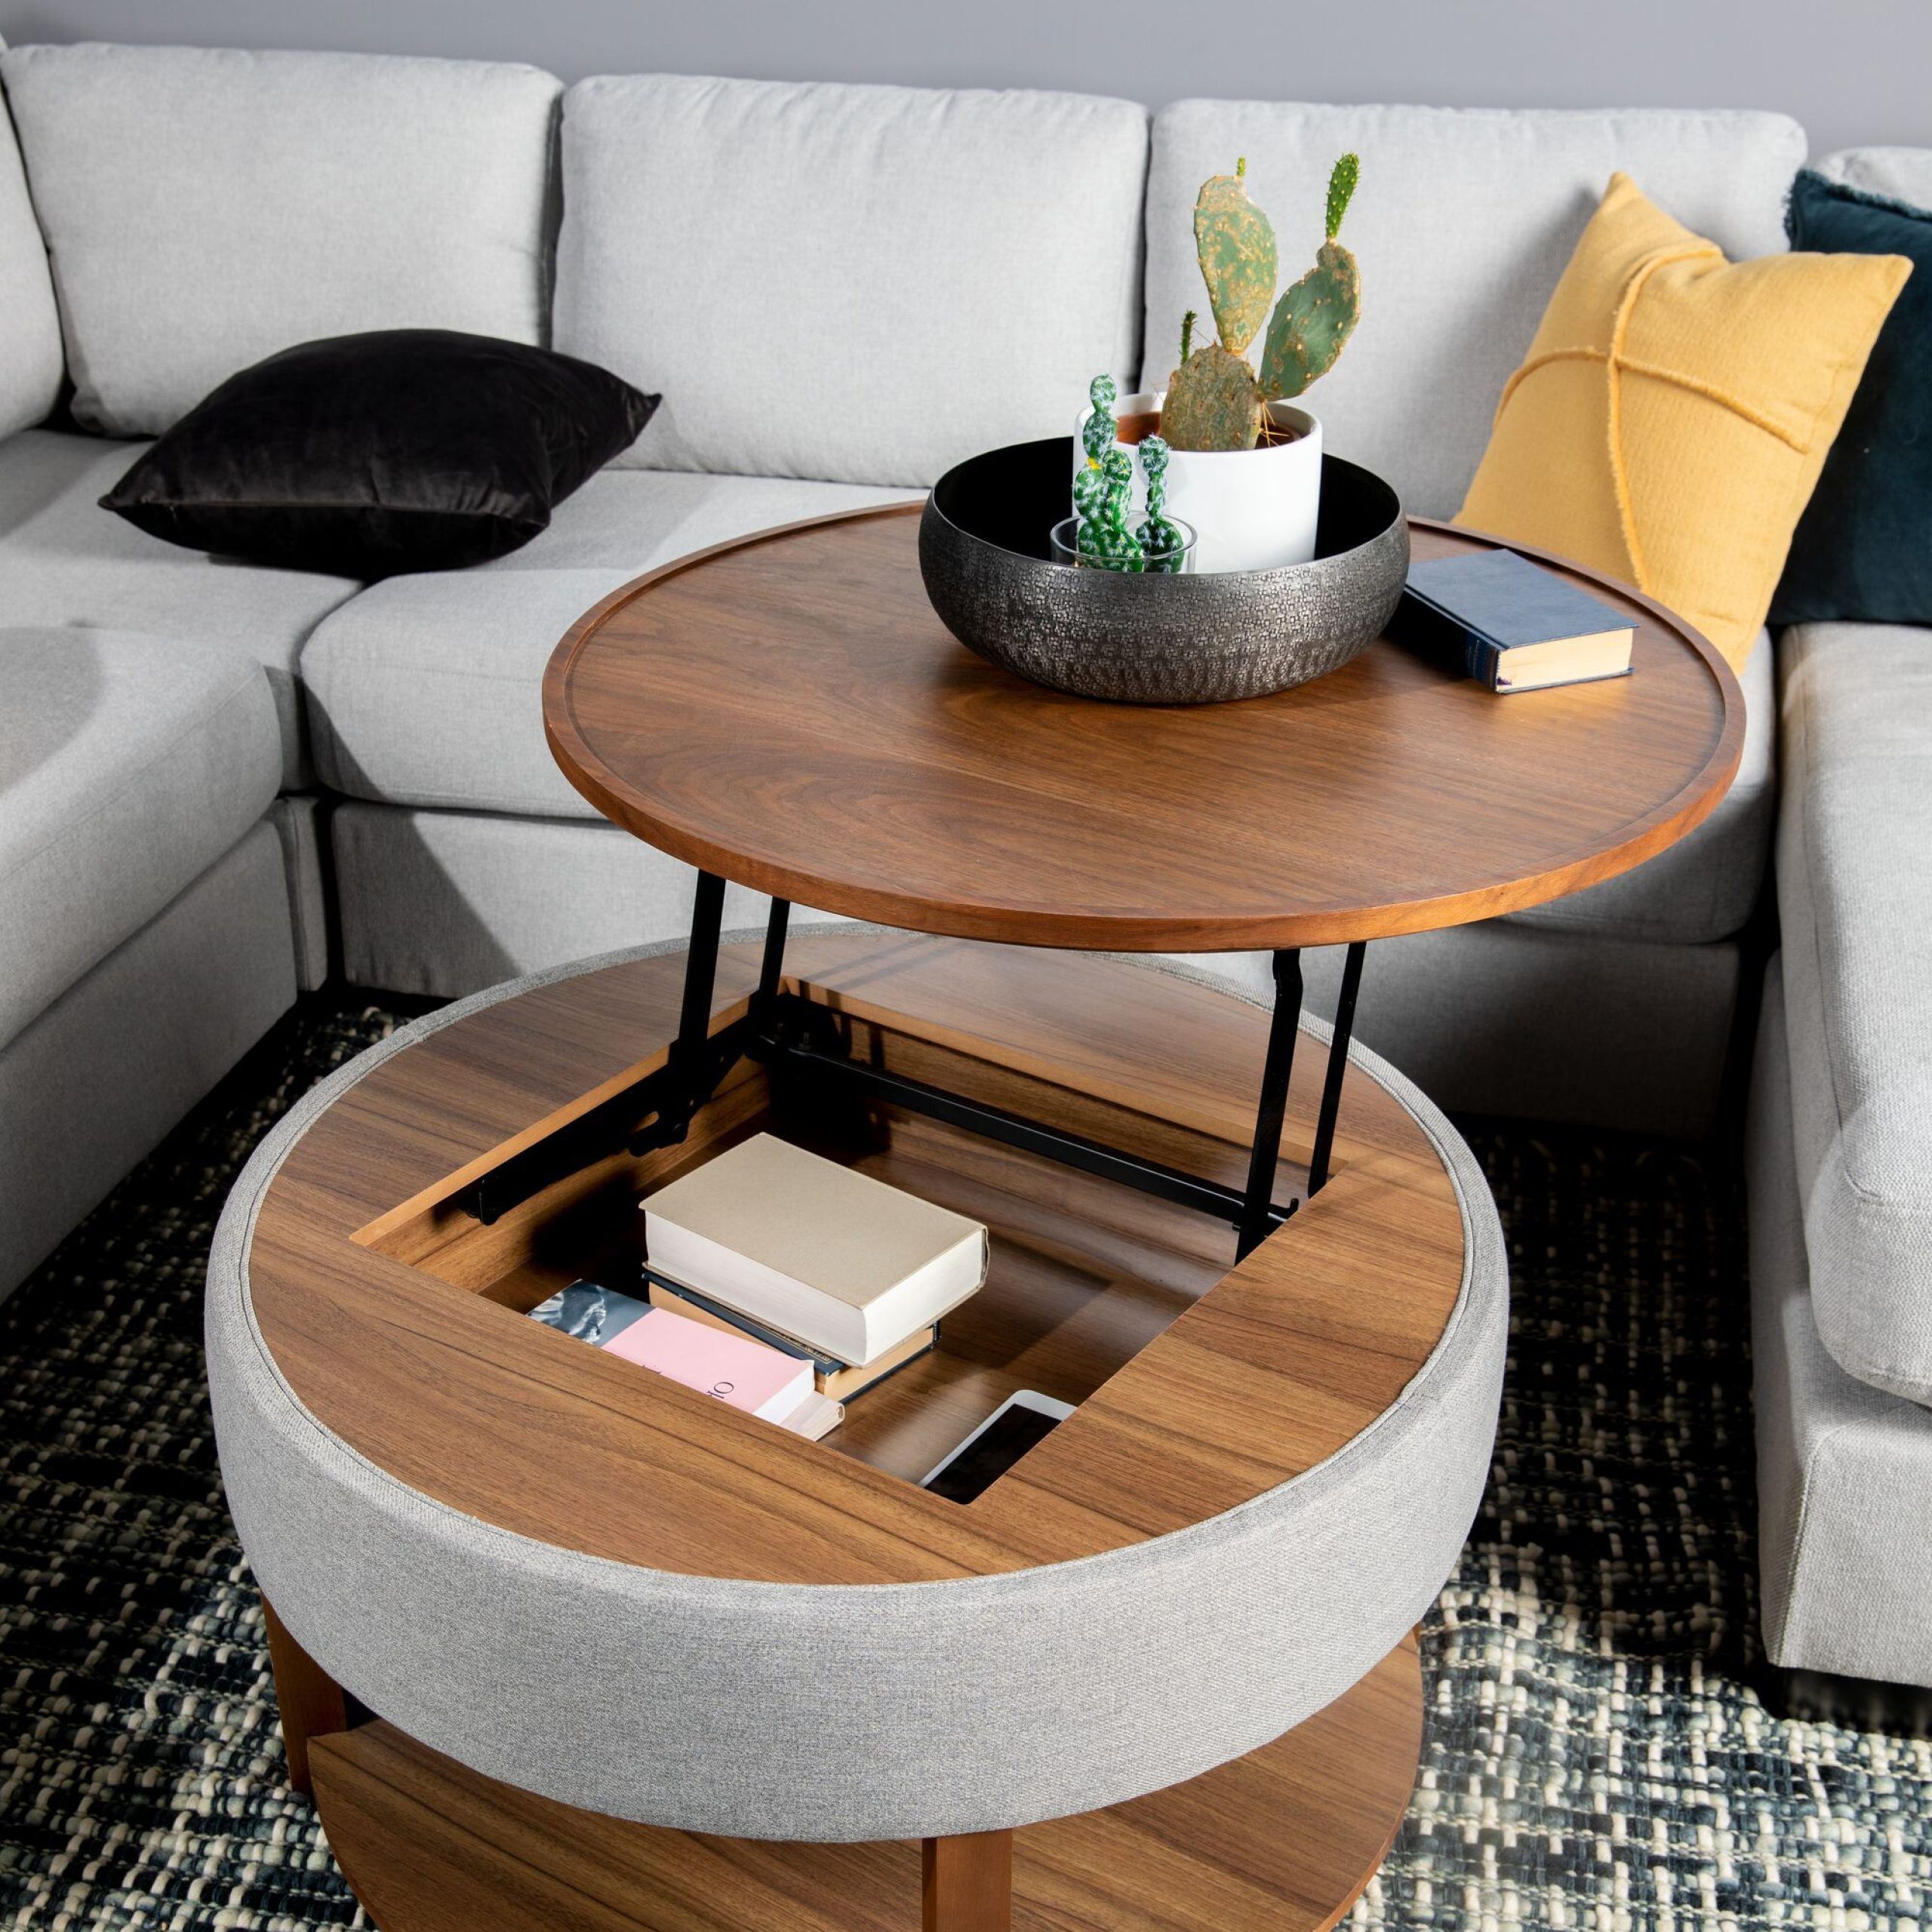 Homary Round Coffee Table White With Storage Lift Top – Florence Round Throughout Round Coffee Tables With Storage (View 10 of 20)